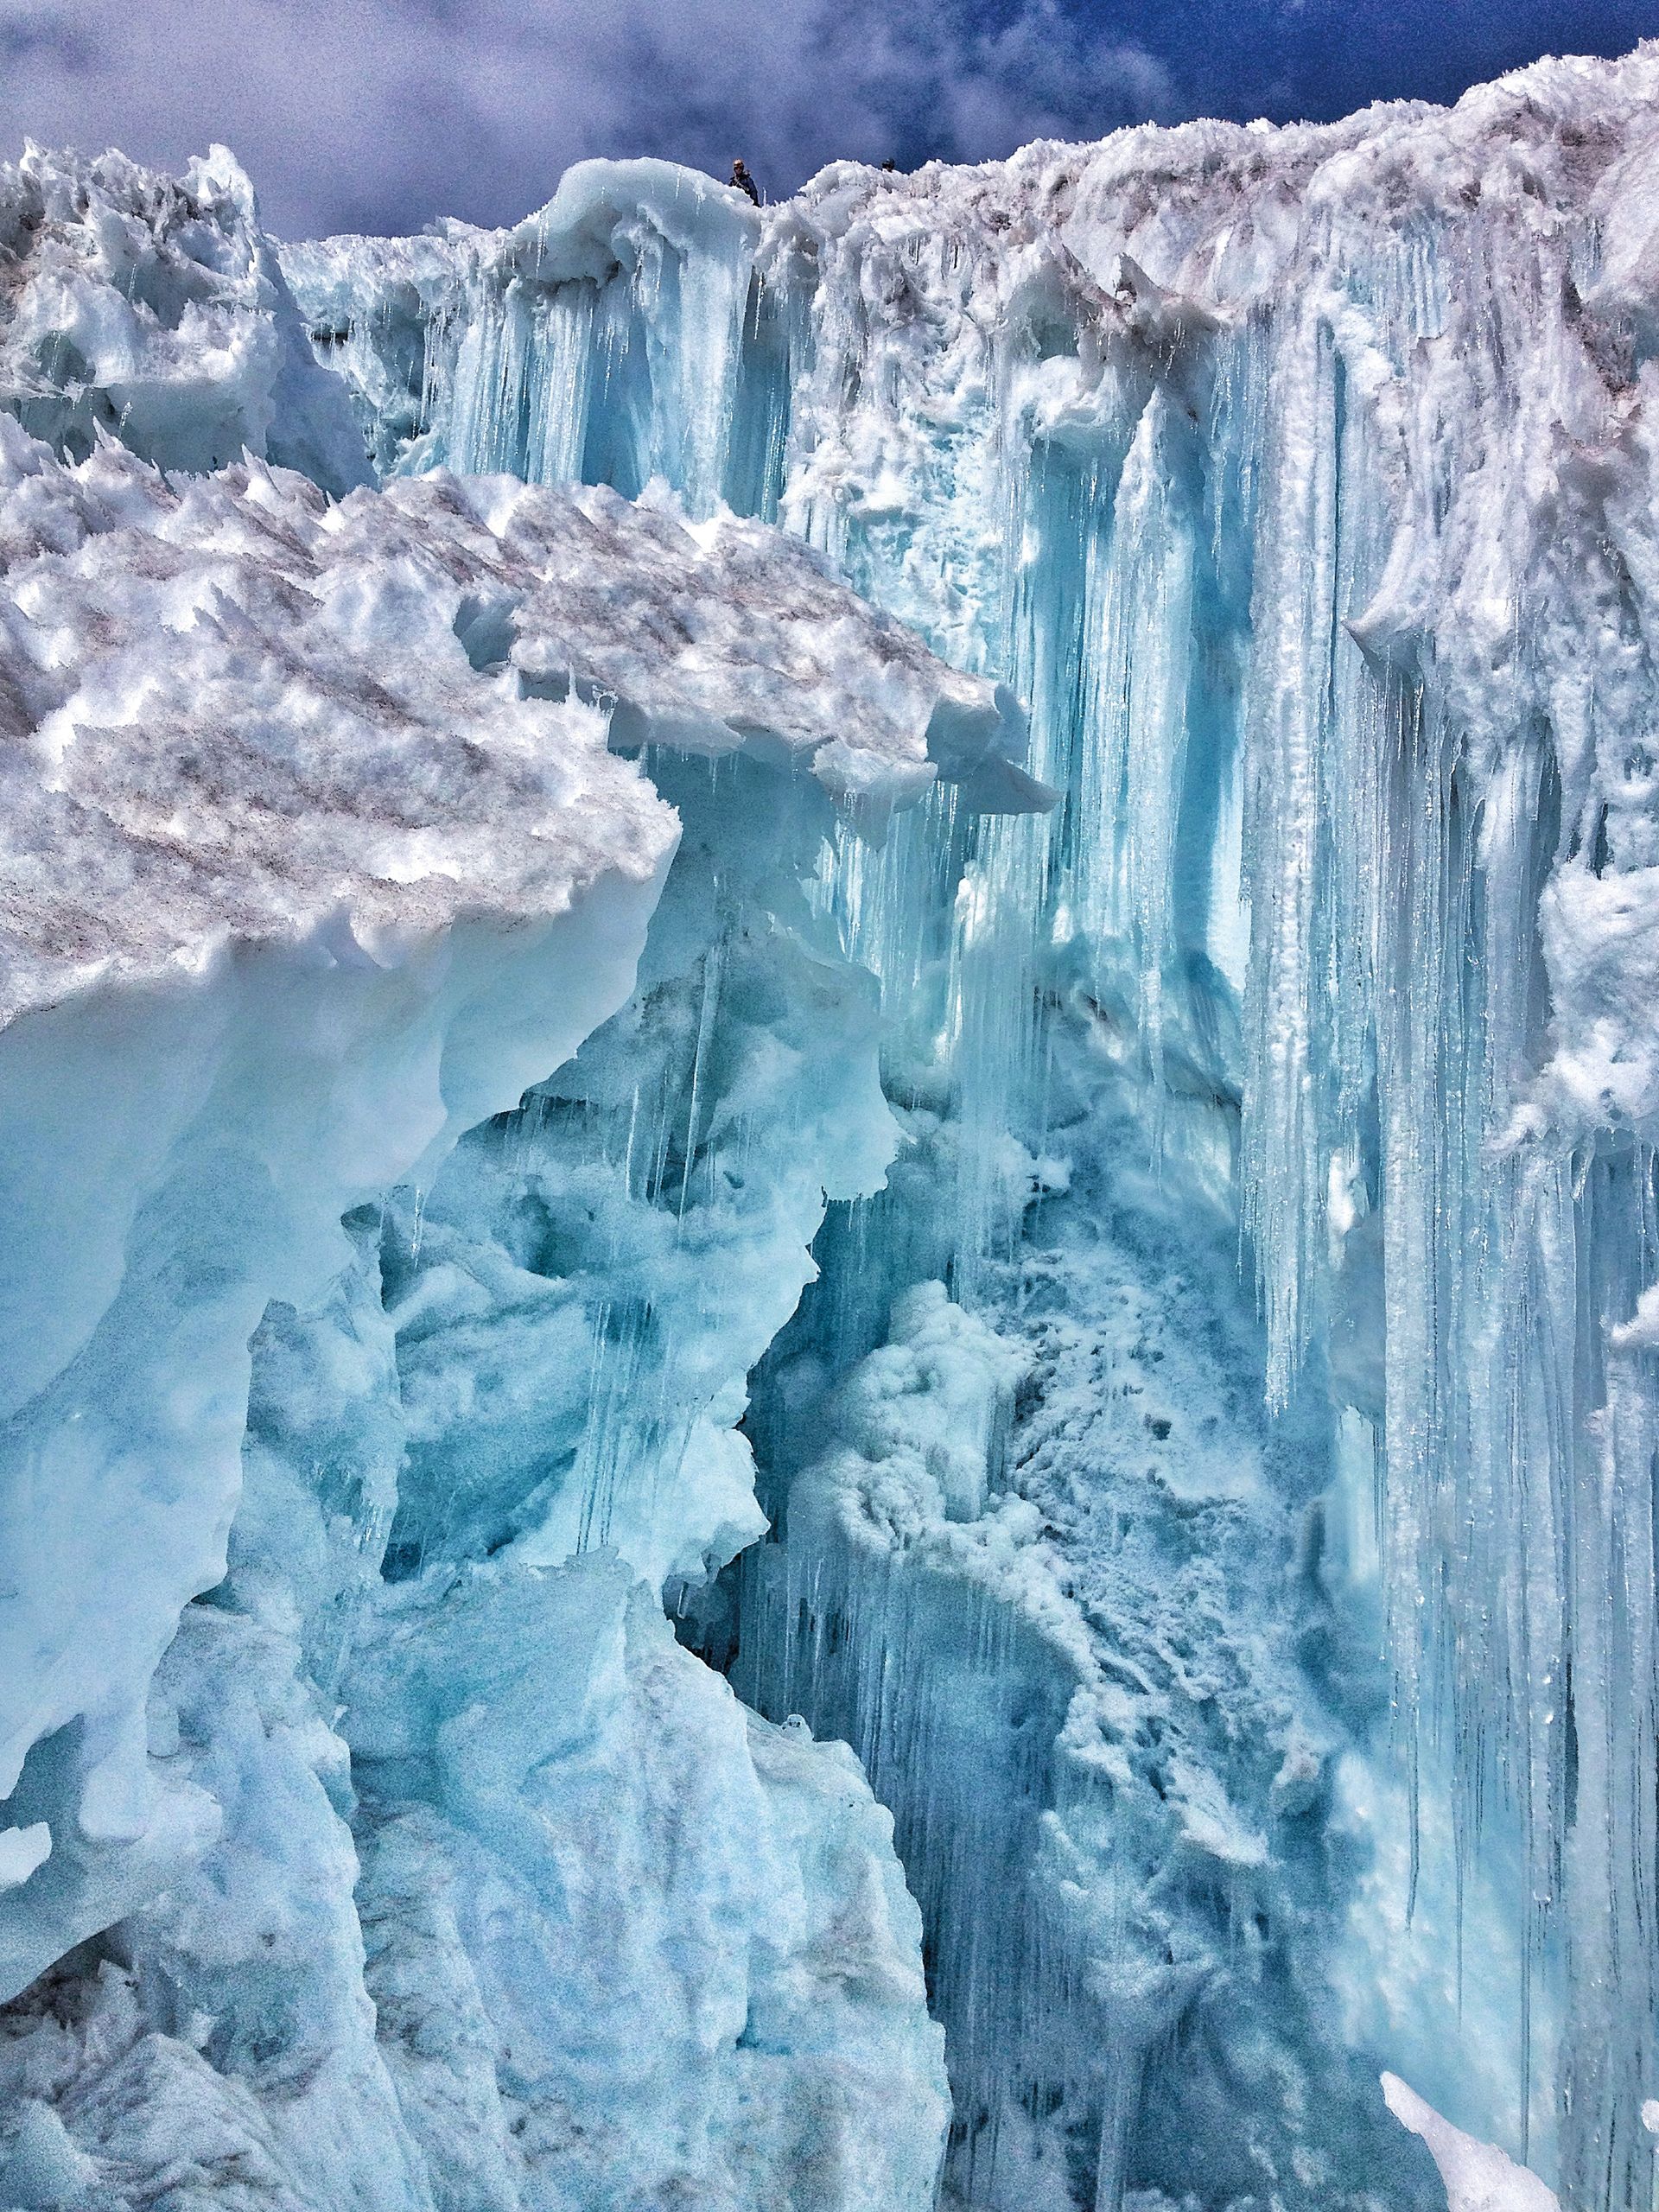 Ice formations in the winter.